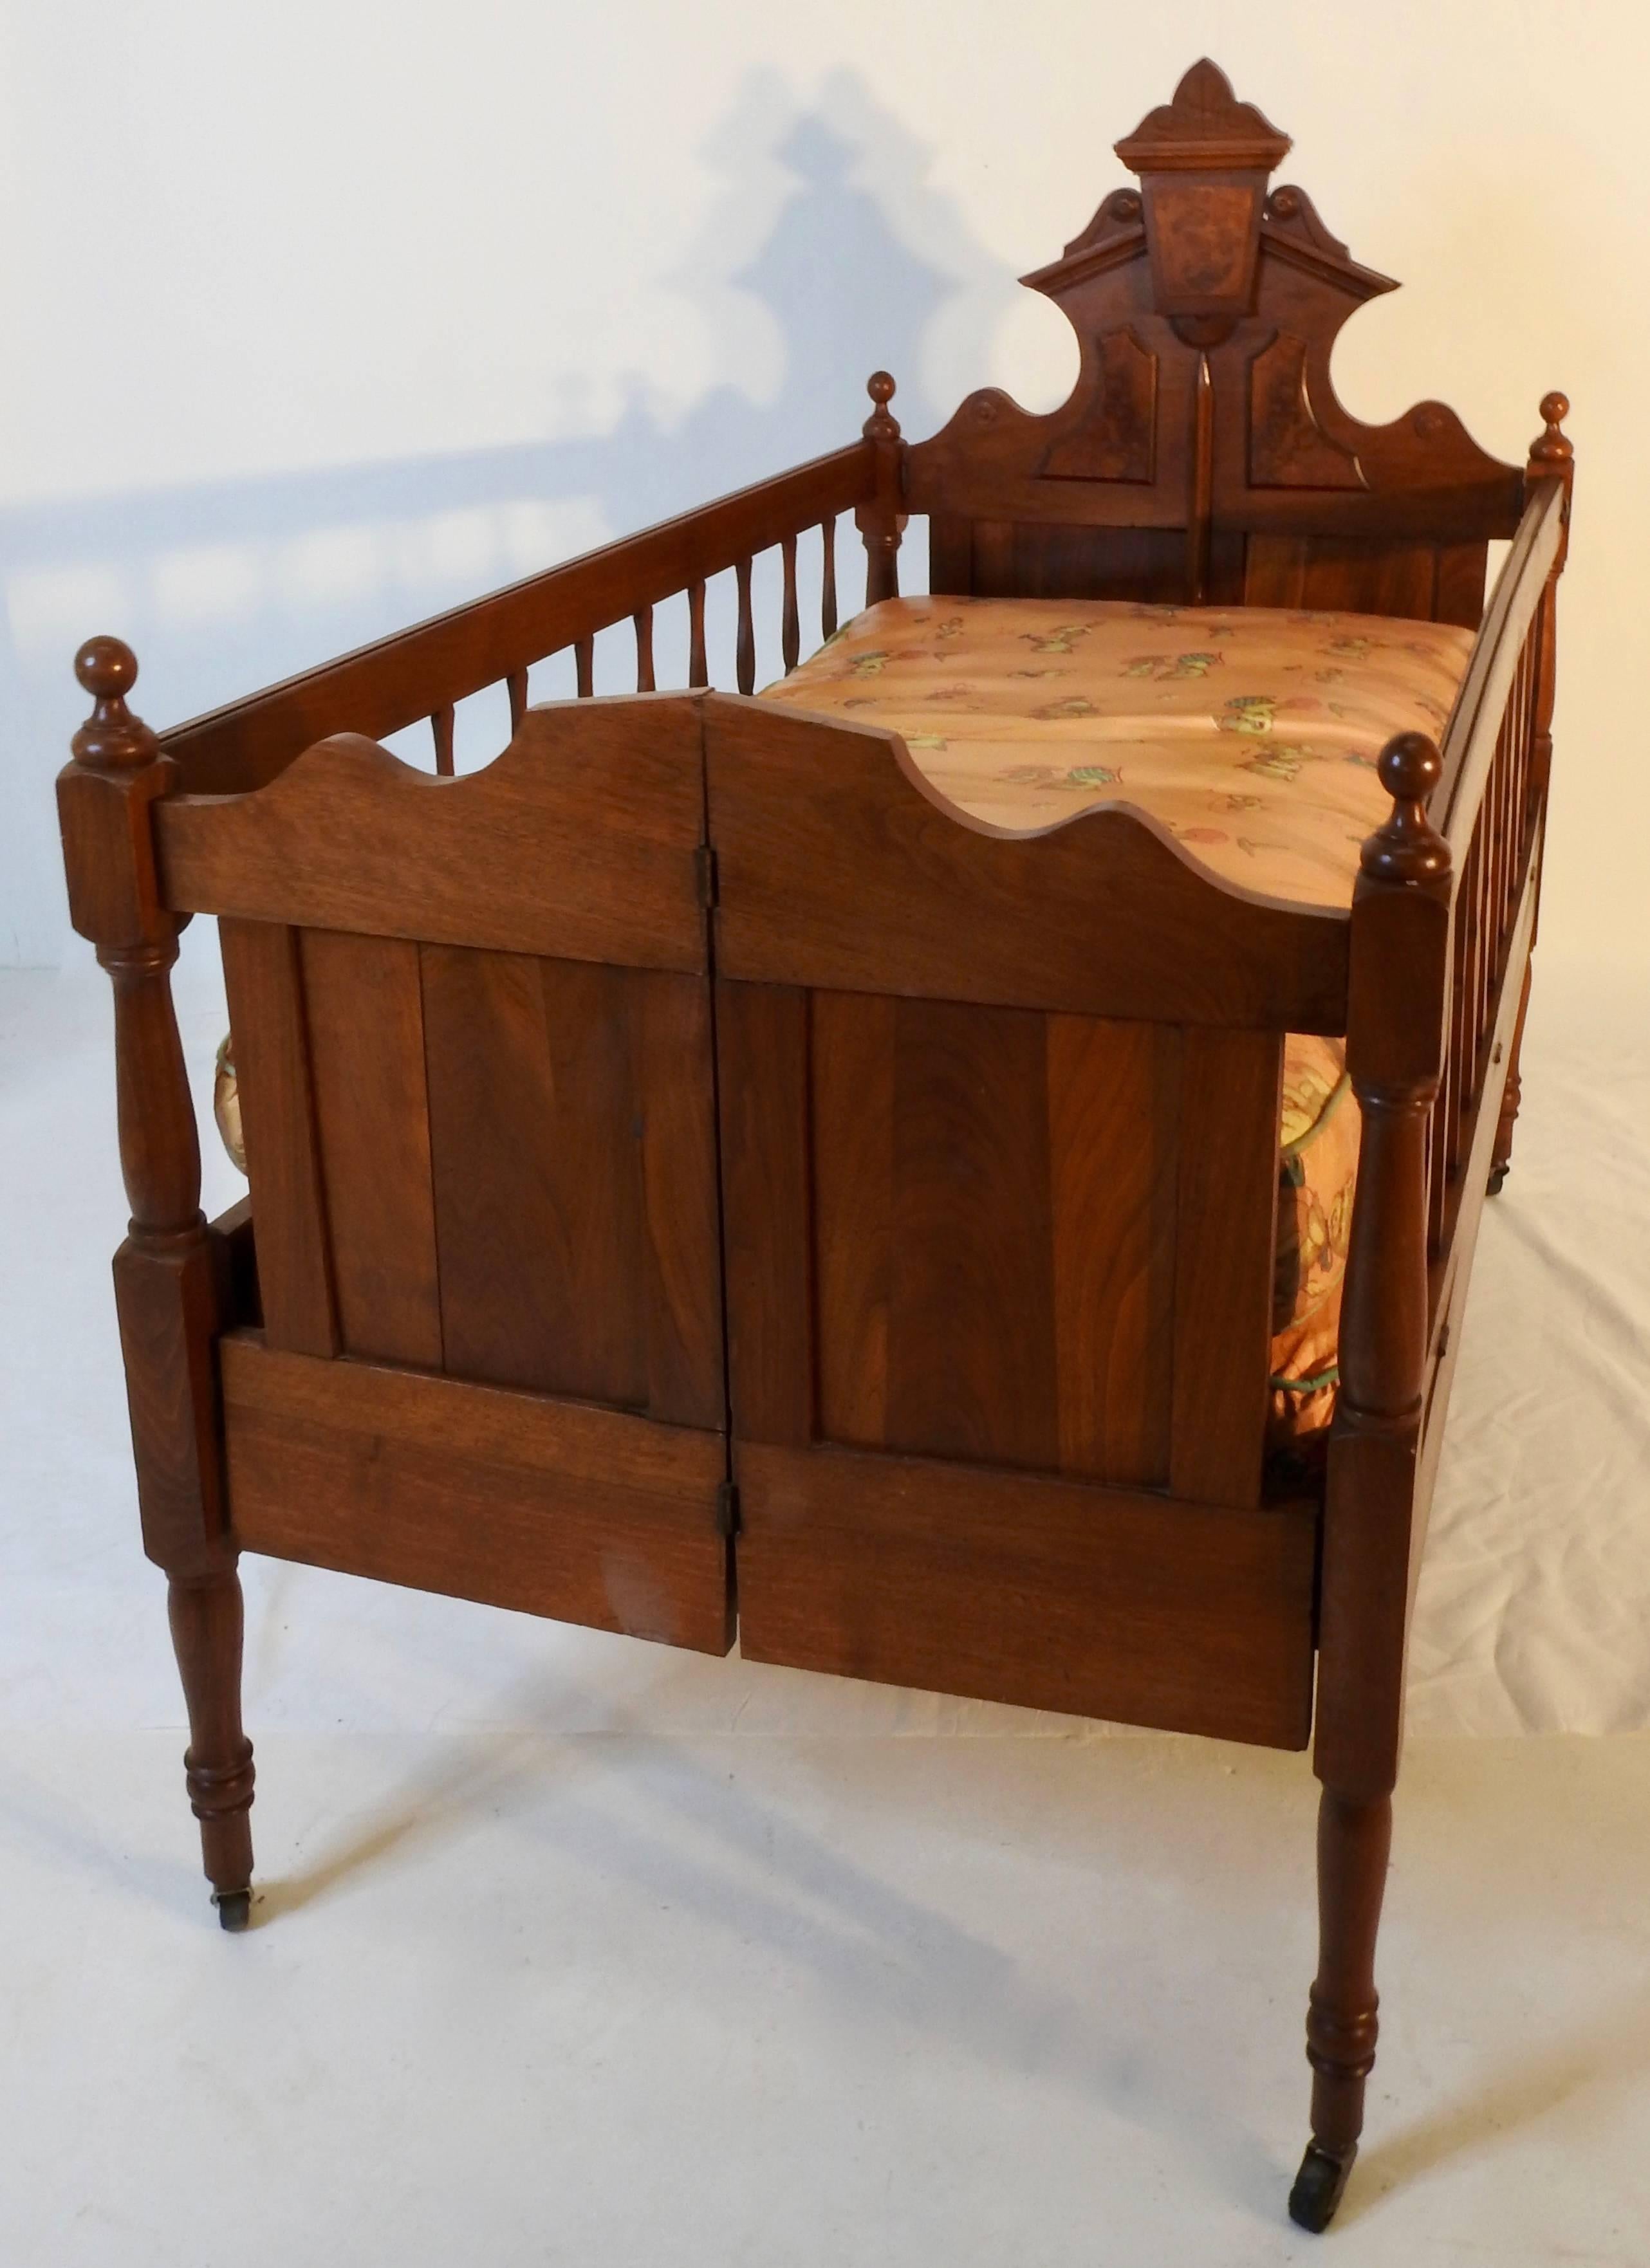 Burled walnut and Classic walnut grace this Victorian baby bed from the 19th century. Includes mattress and springs which is covered in a plastic vinyl type material with stitched seams. The bed sits on four casters rising on a turned wood leg.